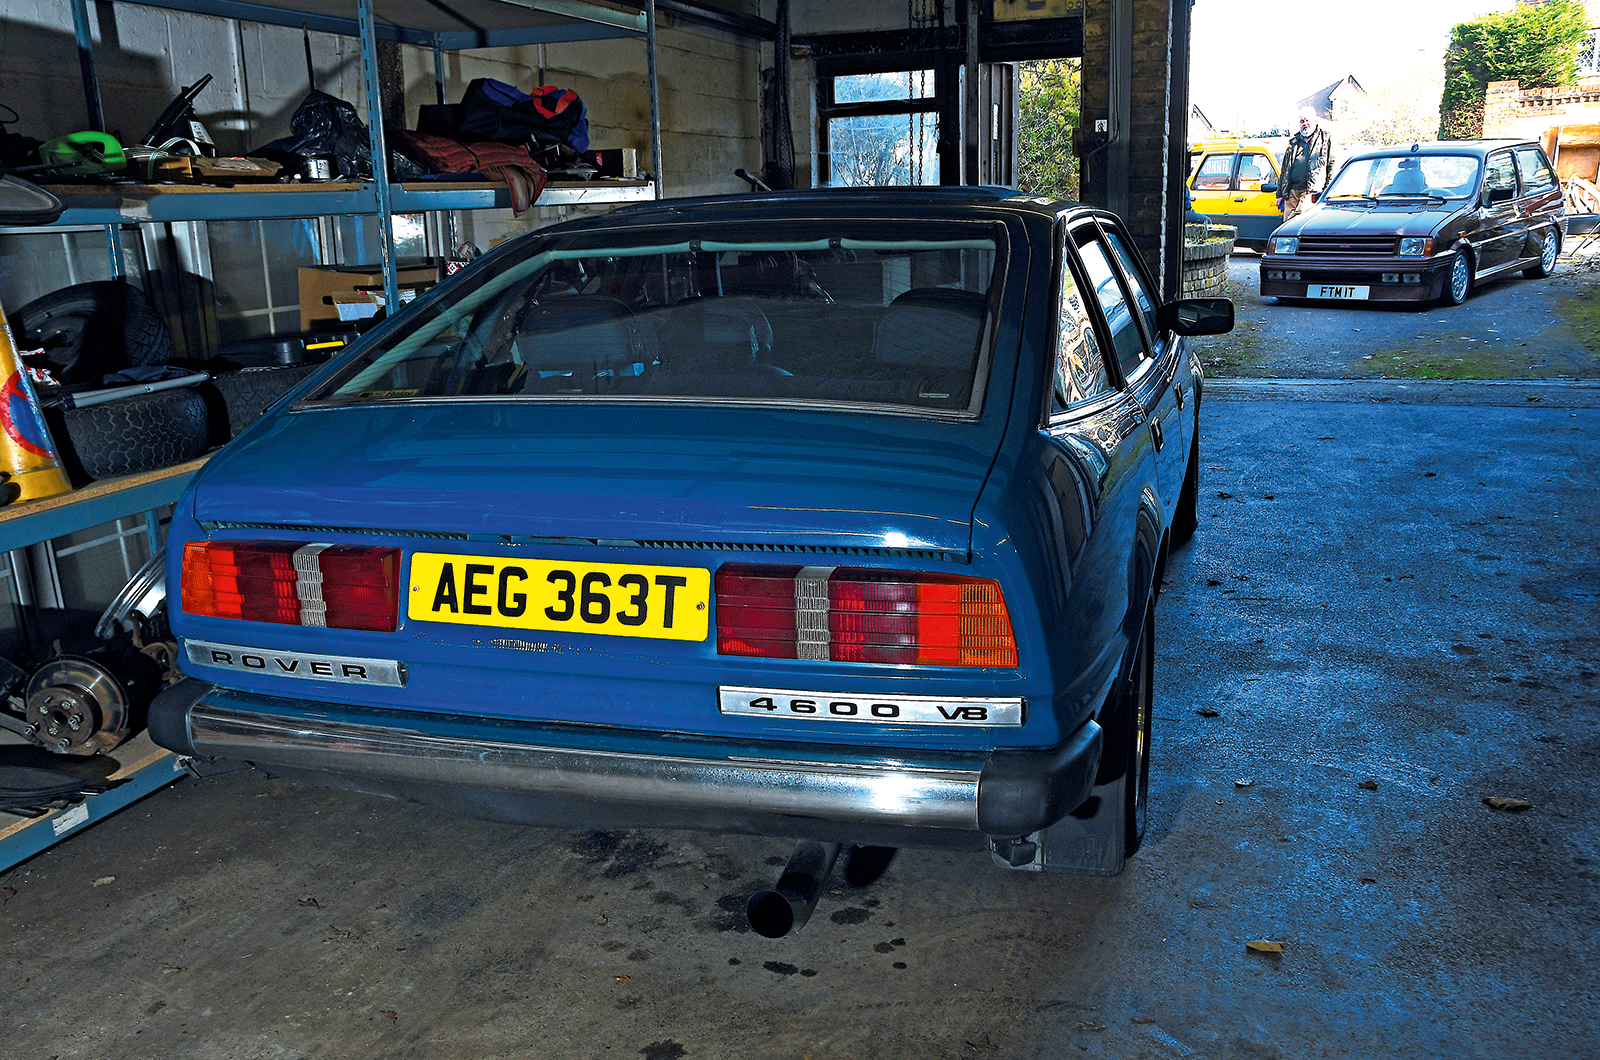 Classic & Sports Car – For the love of British Leyland